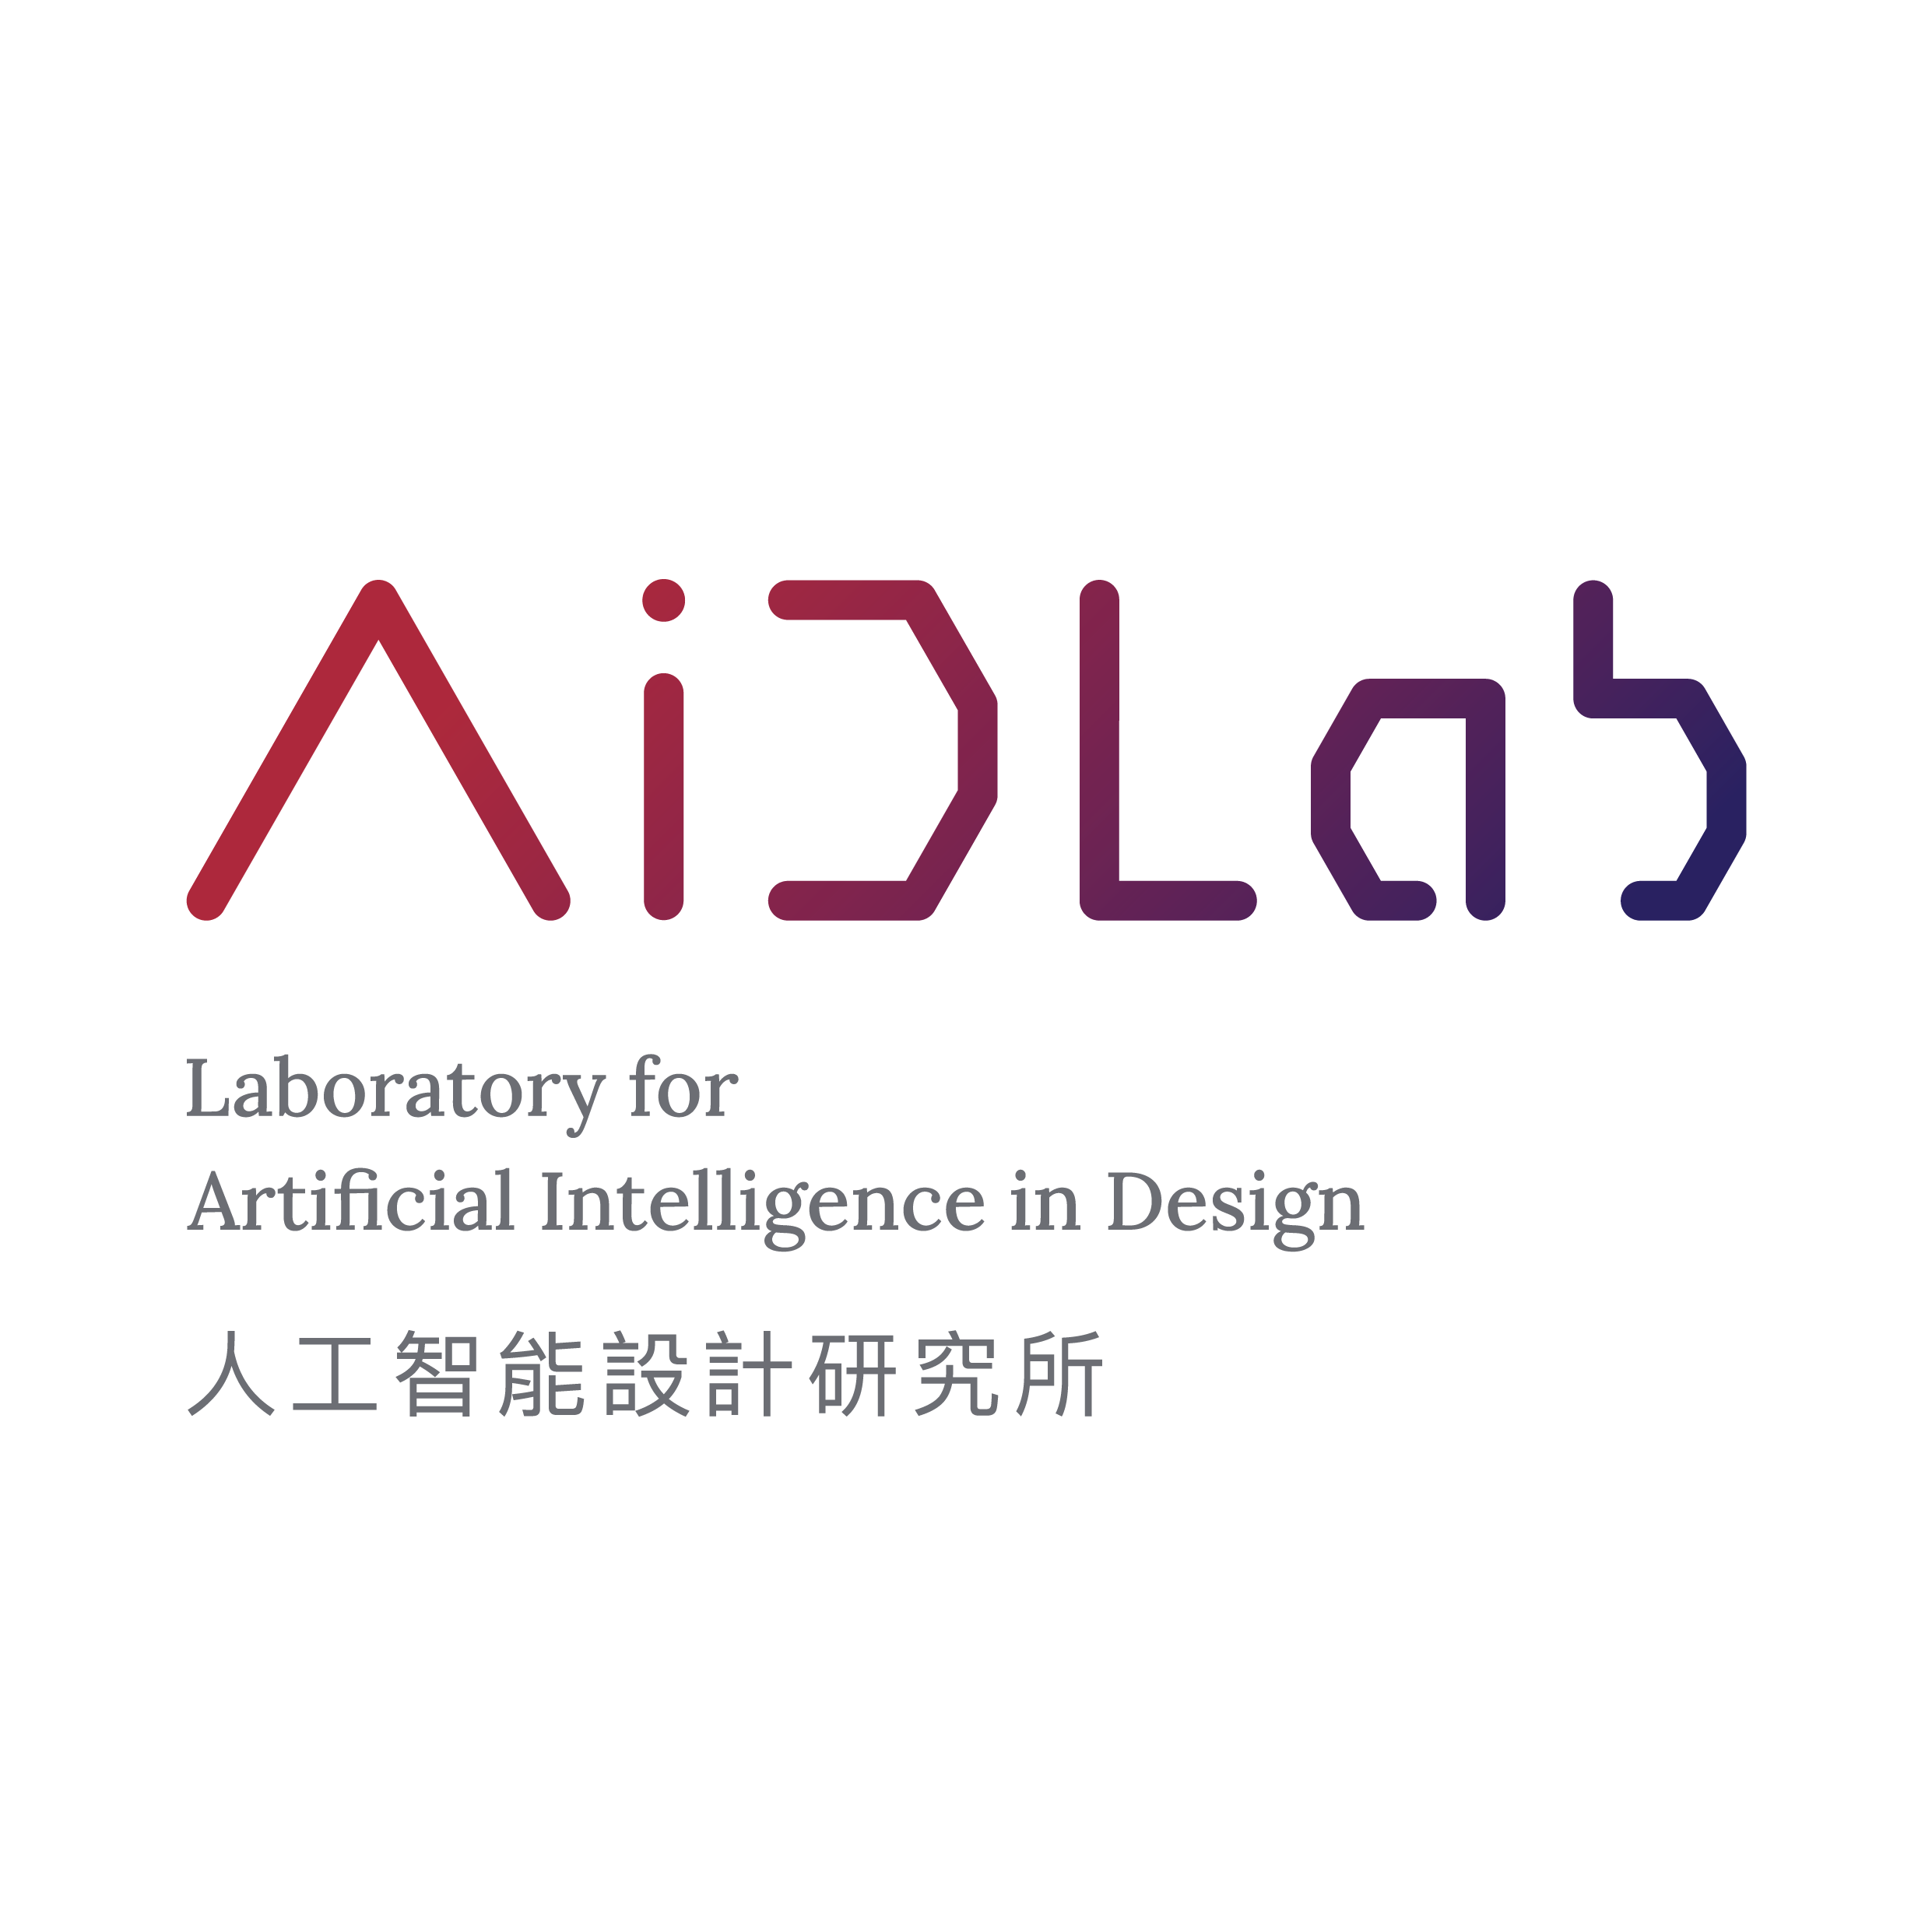 Laboratory for Artificial Intelligence in Design (AiDLab)